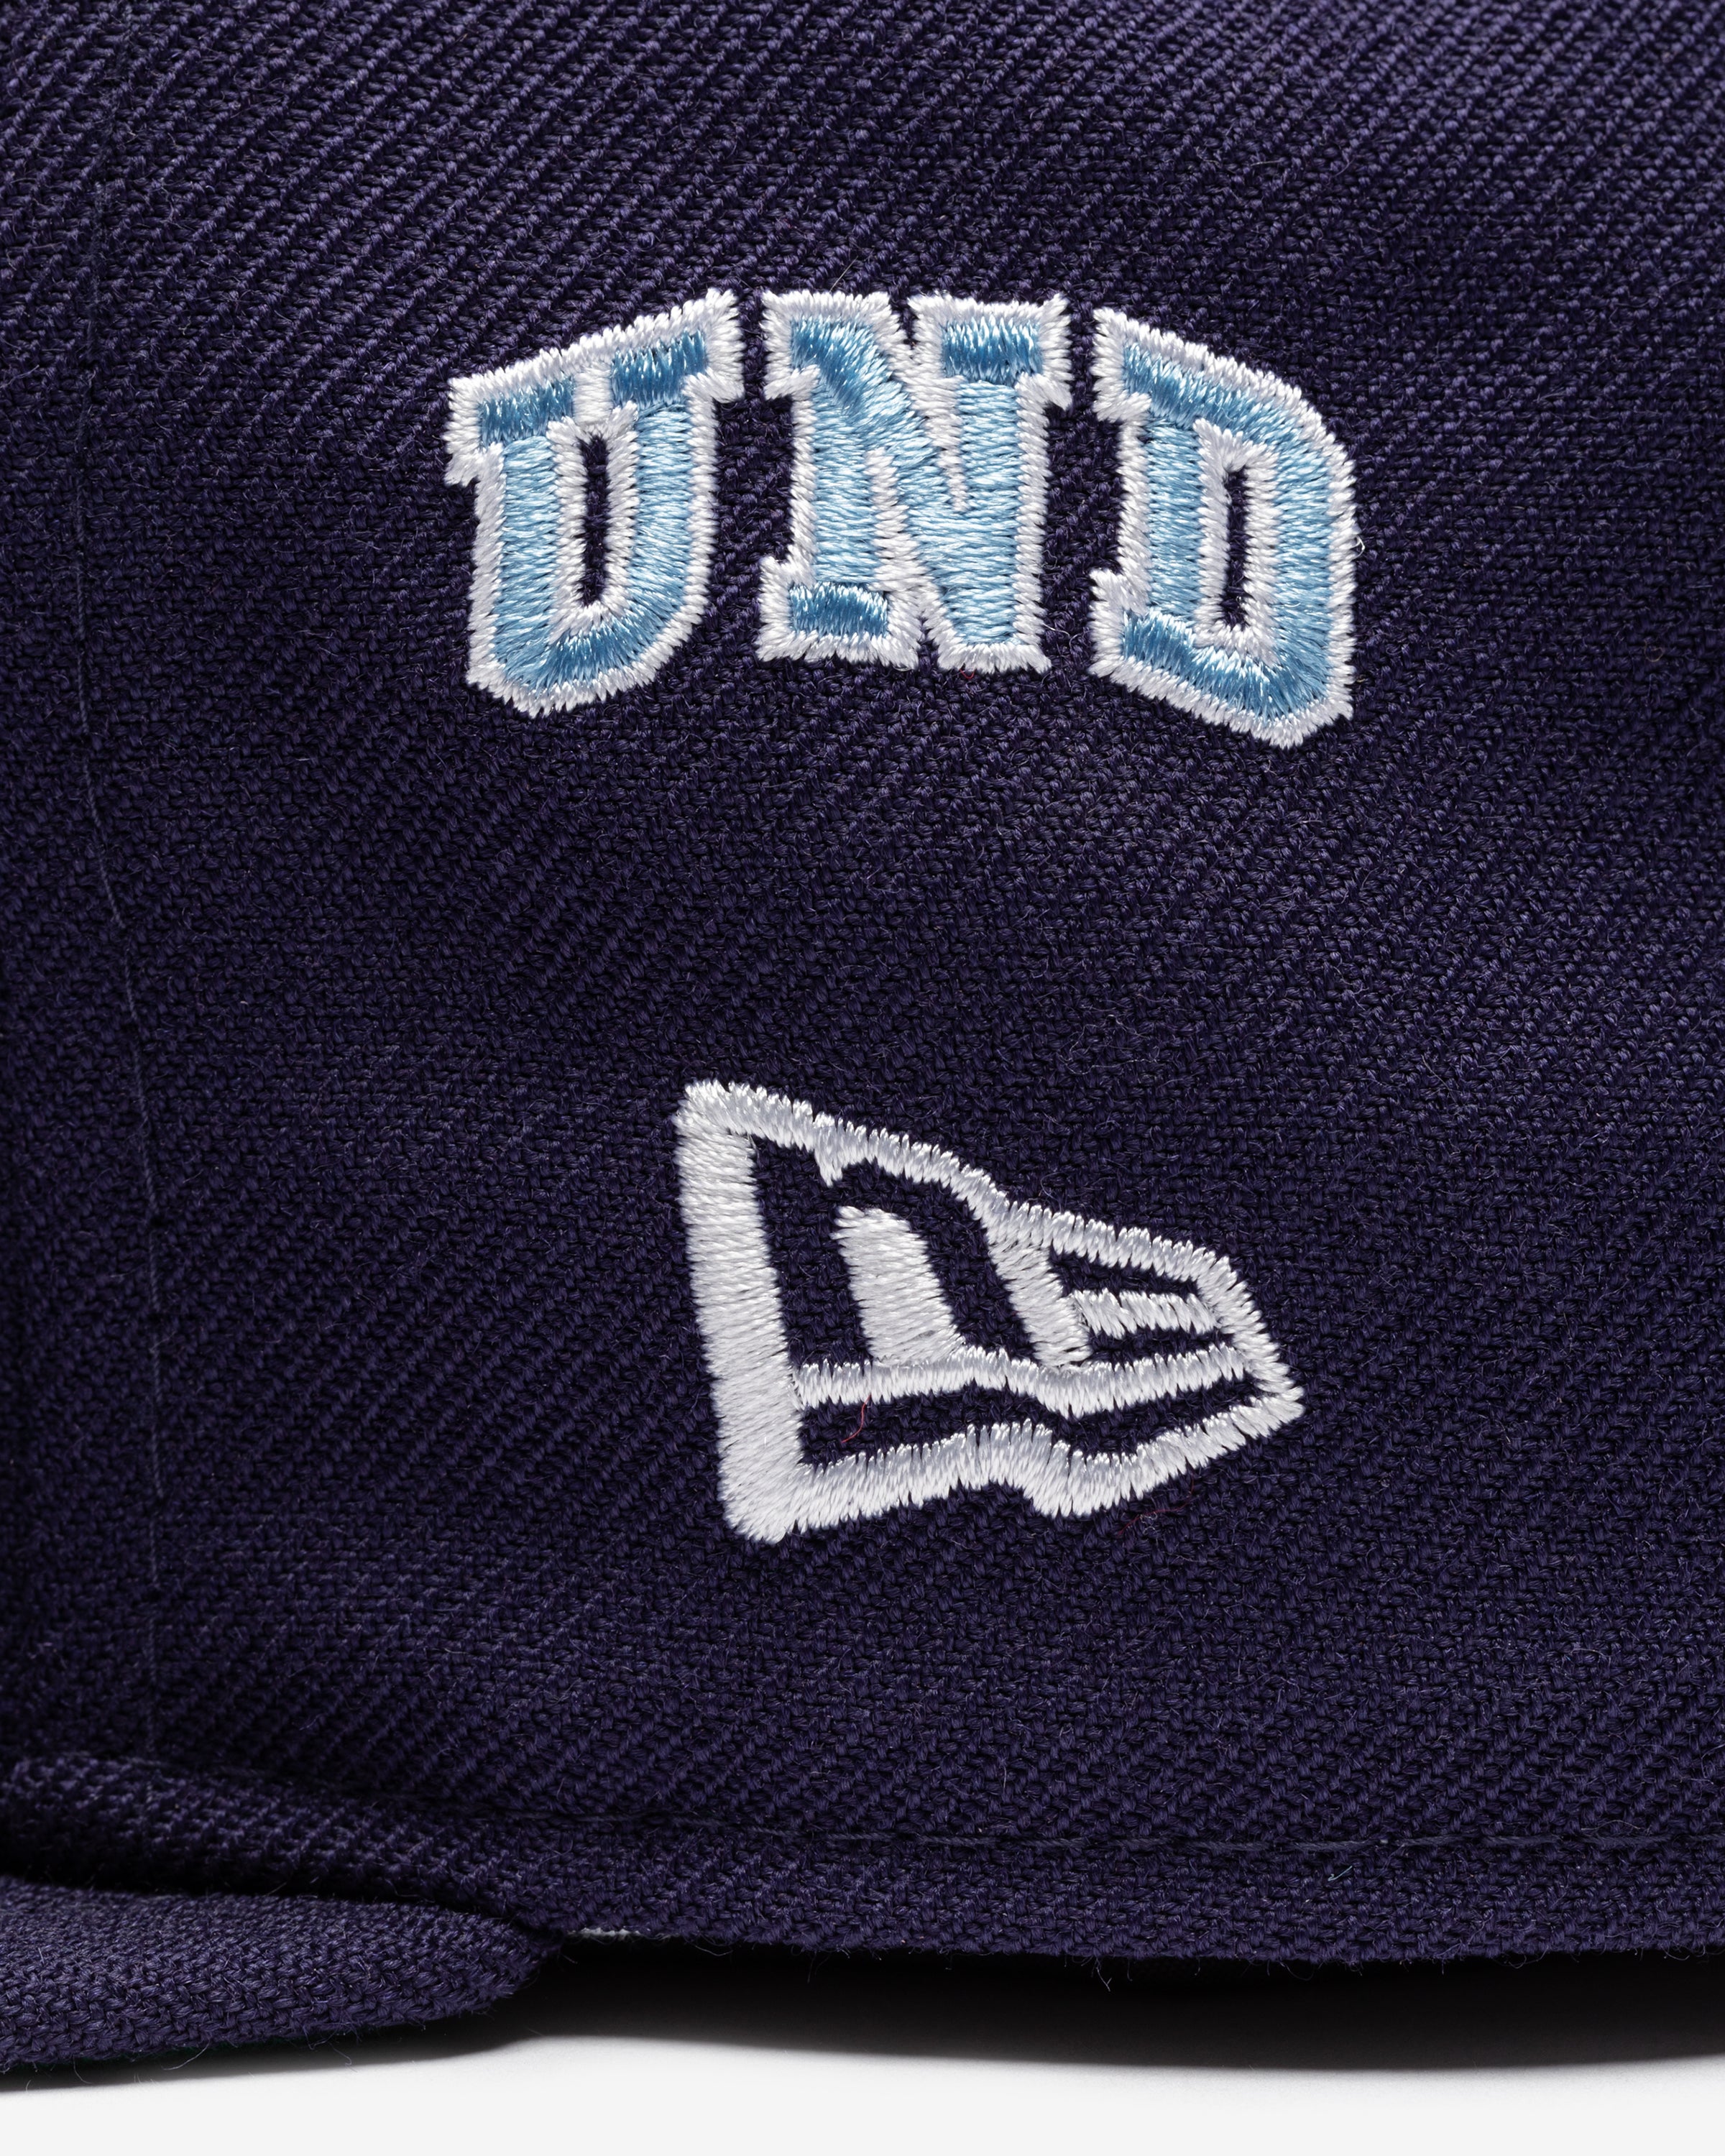 UNDEFEATED X NE X MLB FITTED - TAMPA BAY RAYS